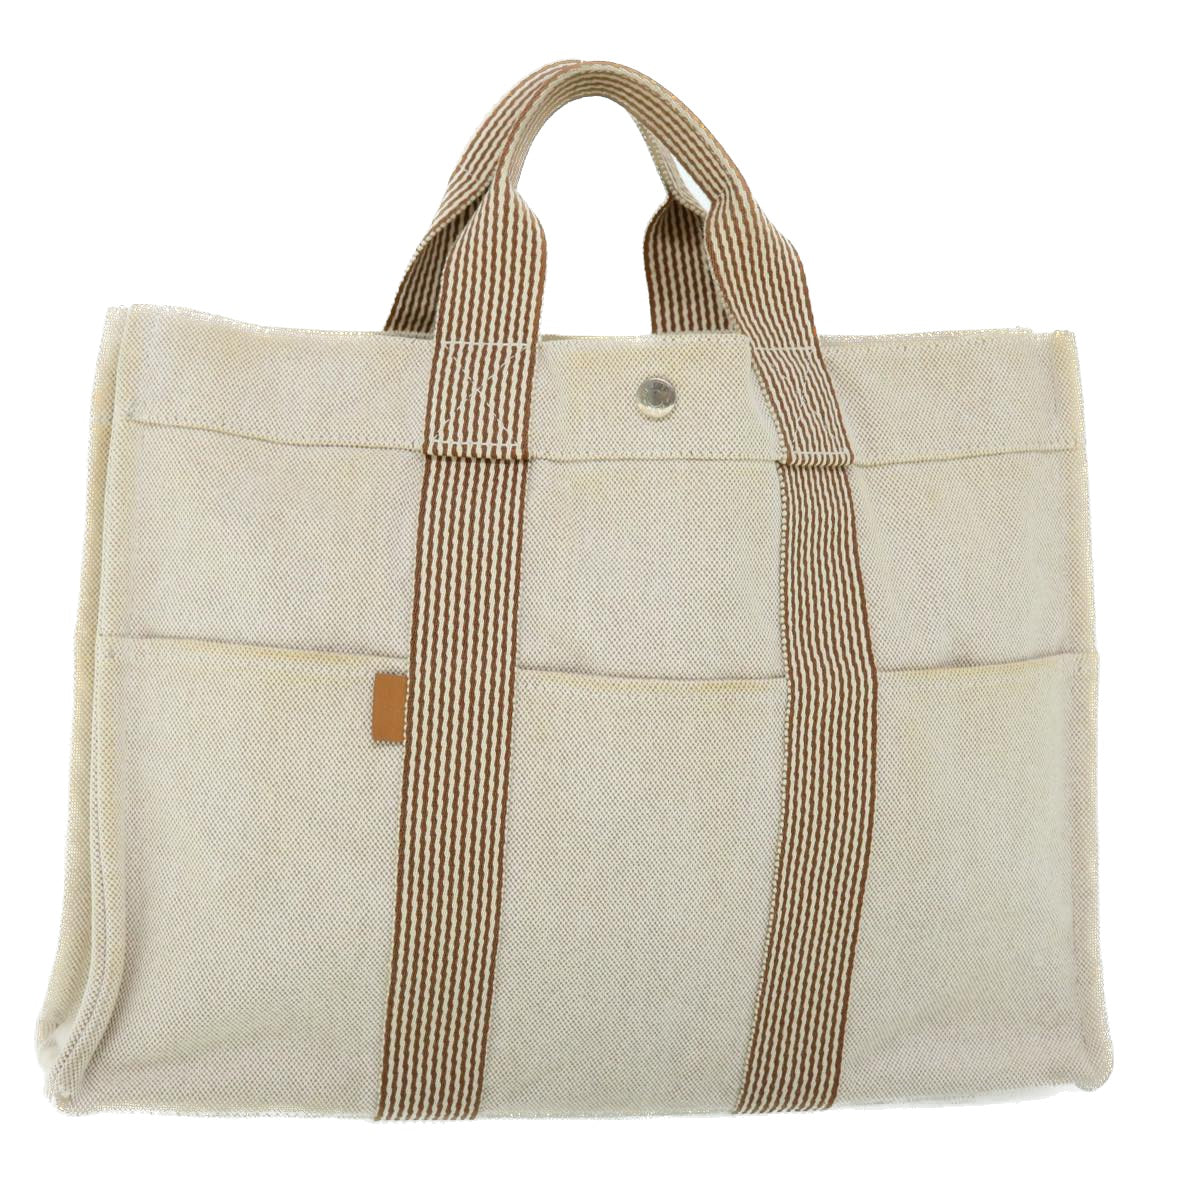 HERMES Her Line MM Hand Bag Canvas Beige Auth bs8300